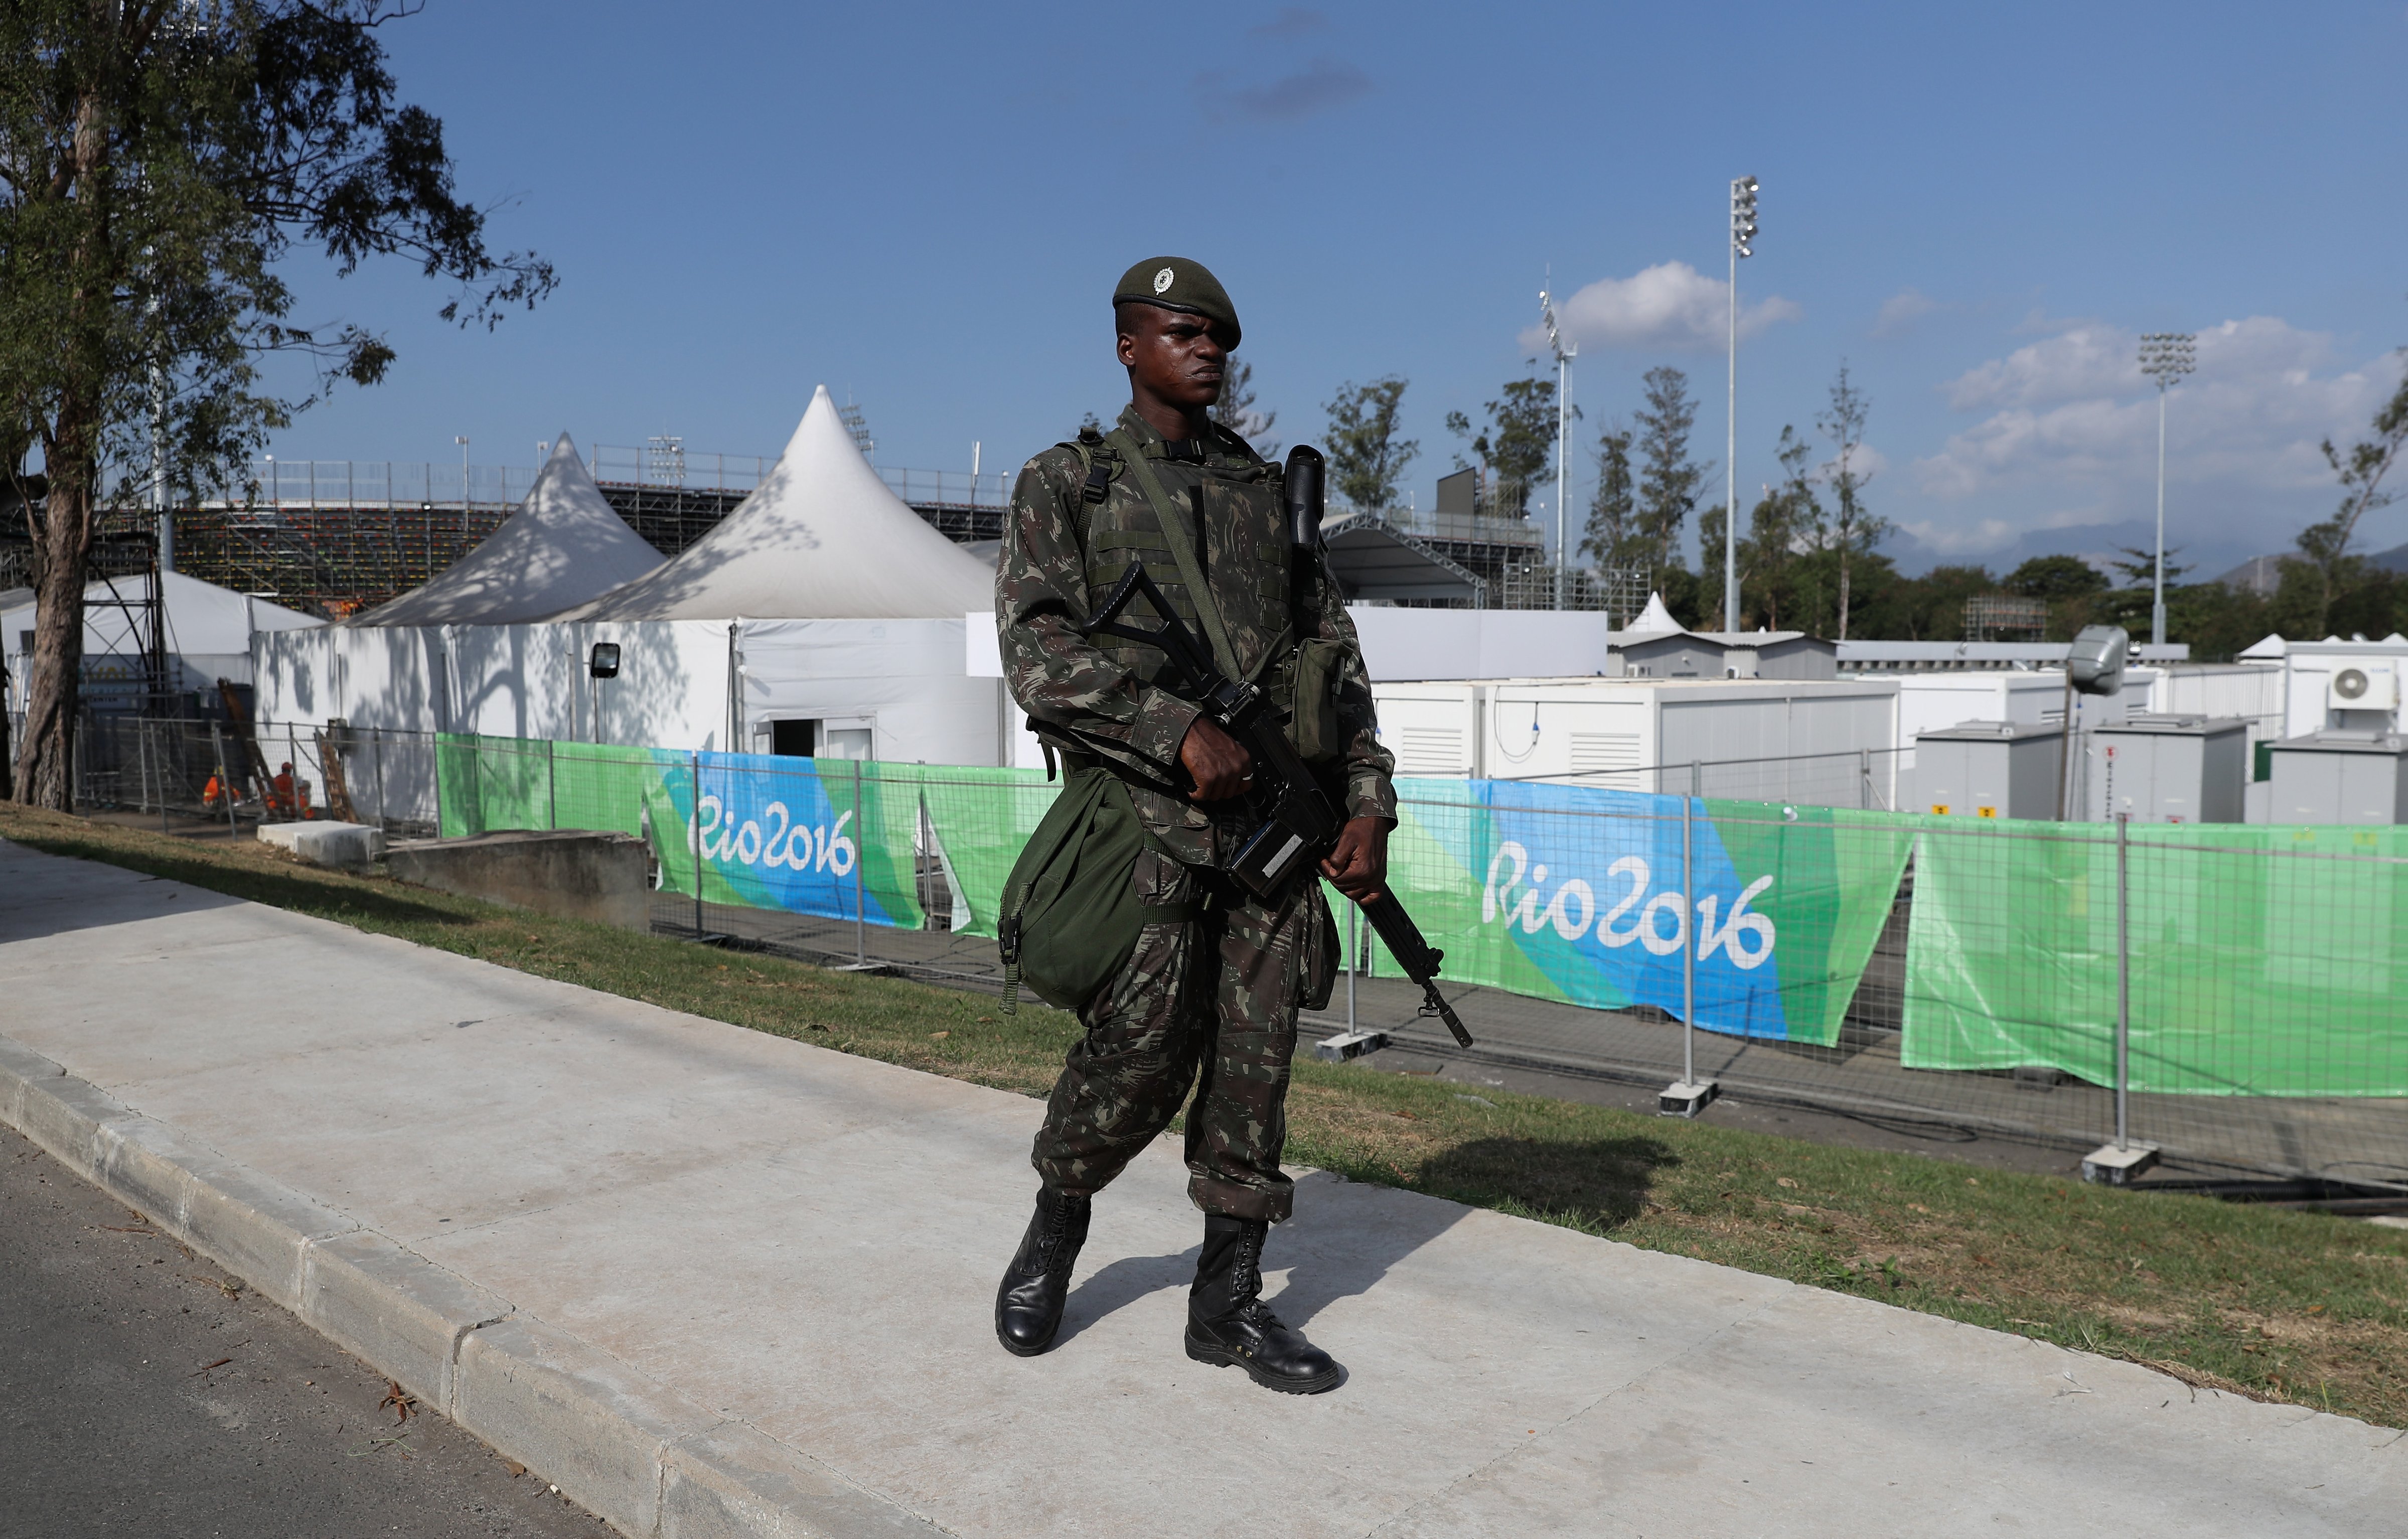 A soldier patrols the perimeter fence around the Deodora Olympic sports complex during the build up to the Rio Olympic Games on July 30, 2016 in Rio de Janeiro. (David Rogers—Getty Images)